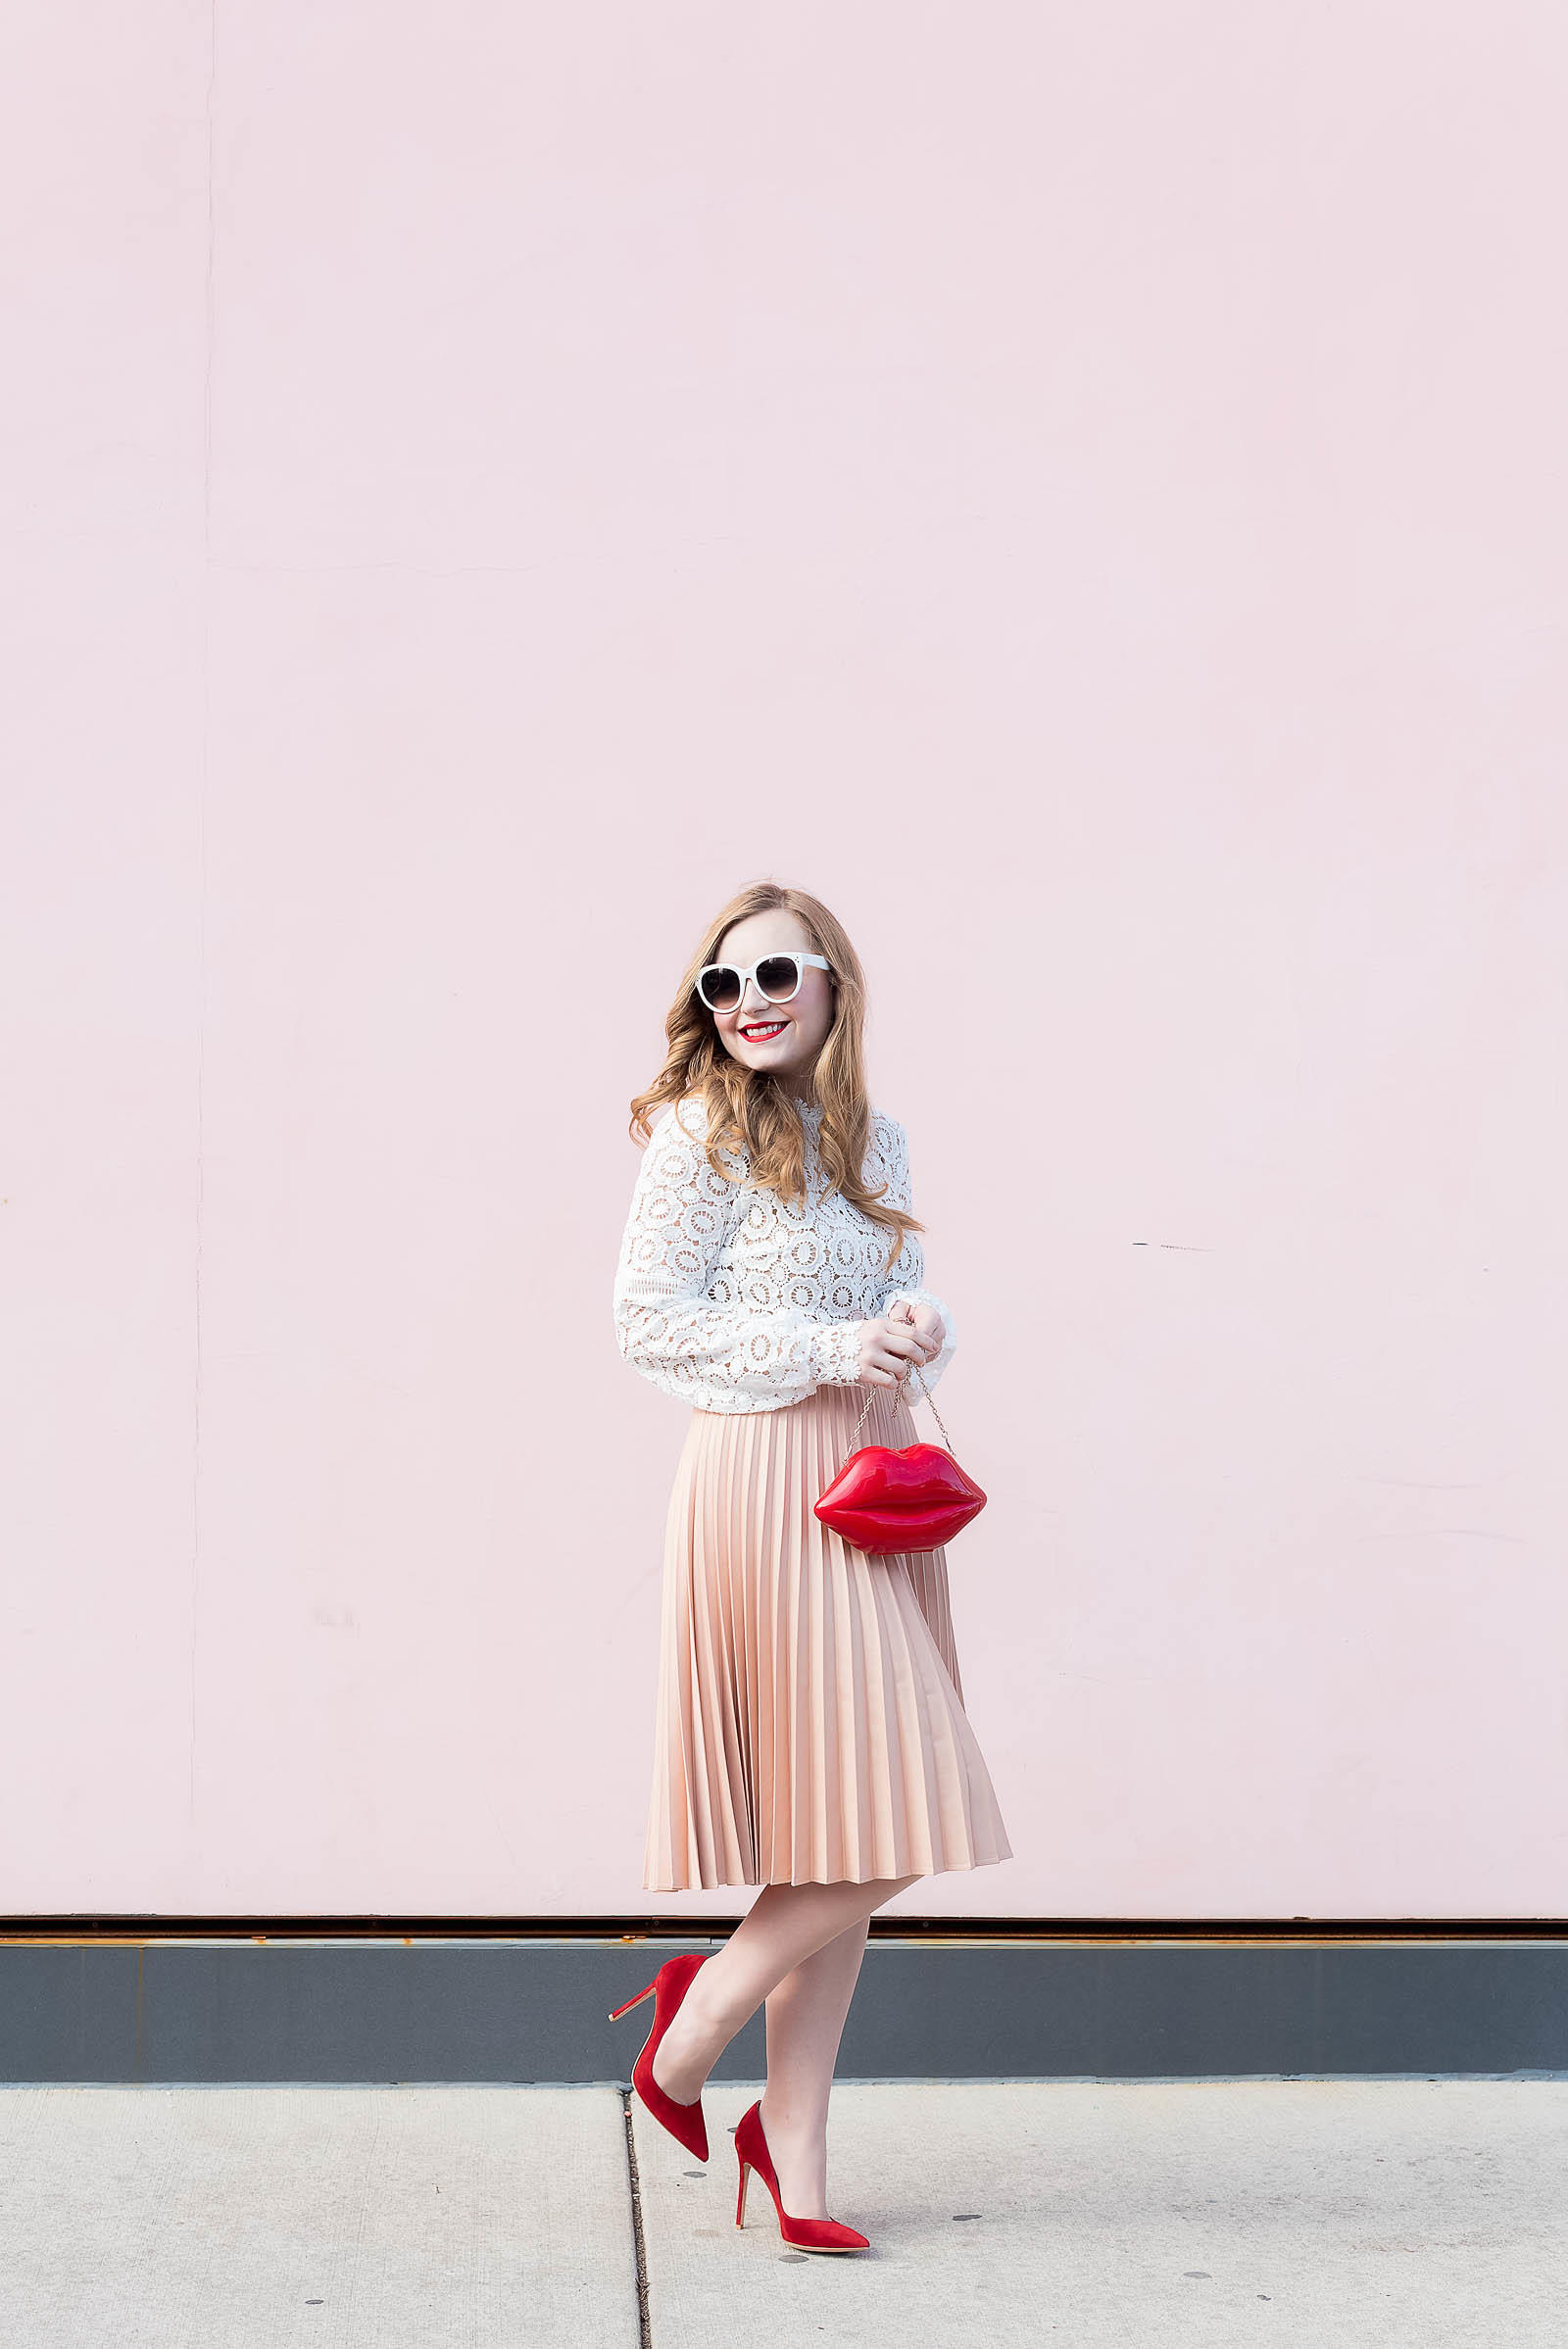 White Lace Pink Pleats Red Pumps Lips Valentine's Day Outfit